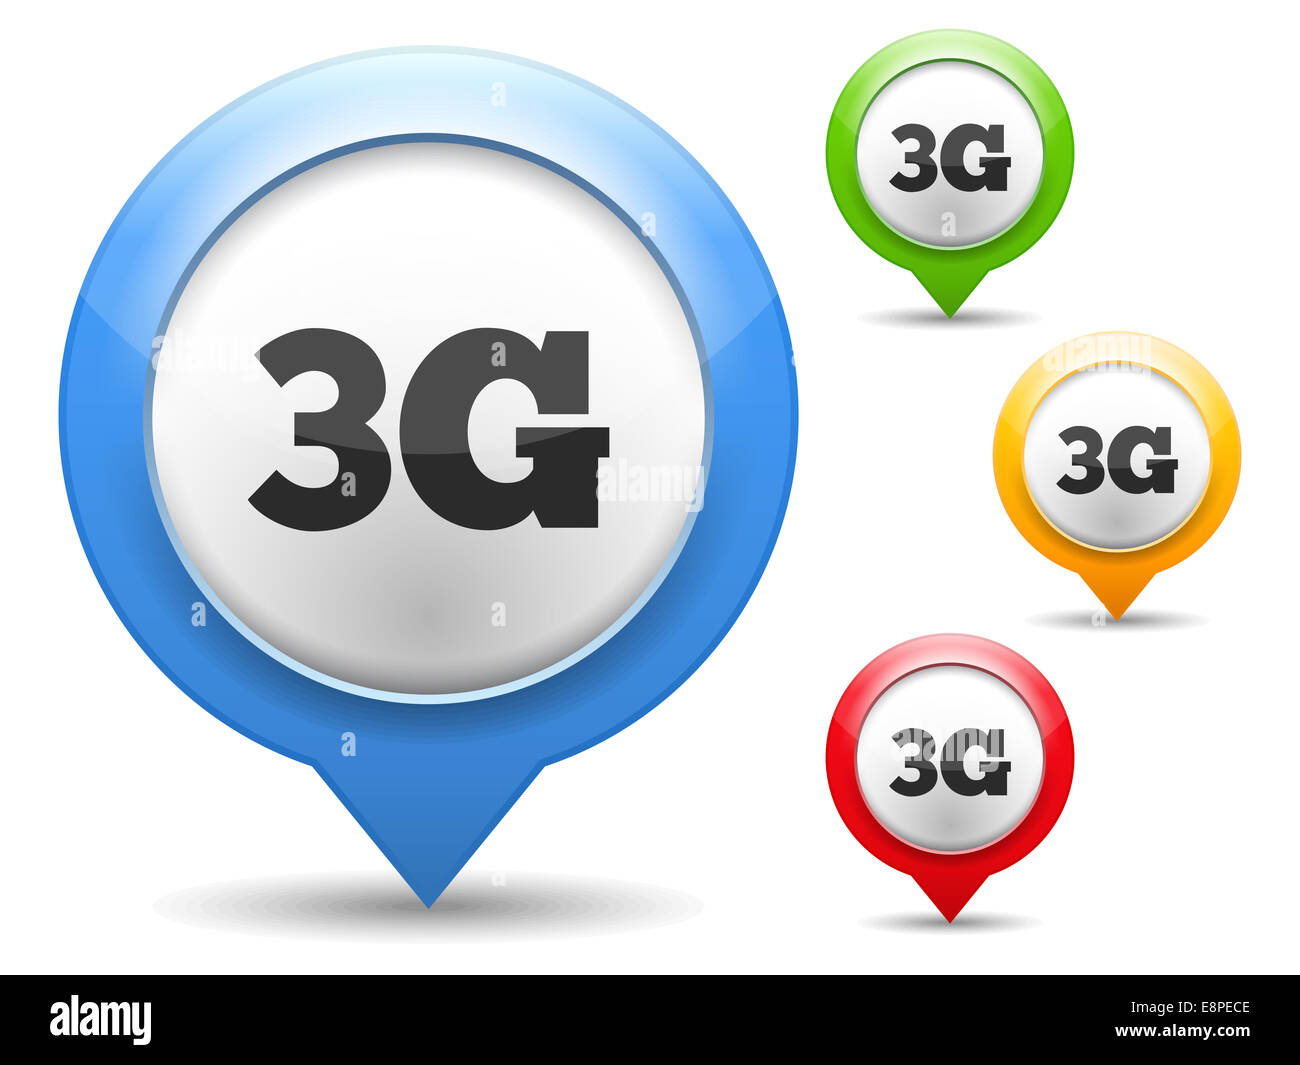 3G icon, four colors Stock Photo